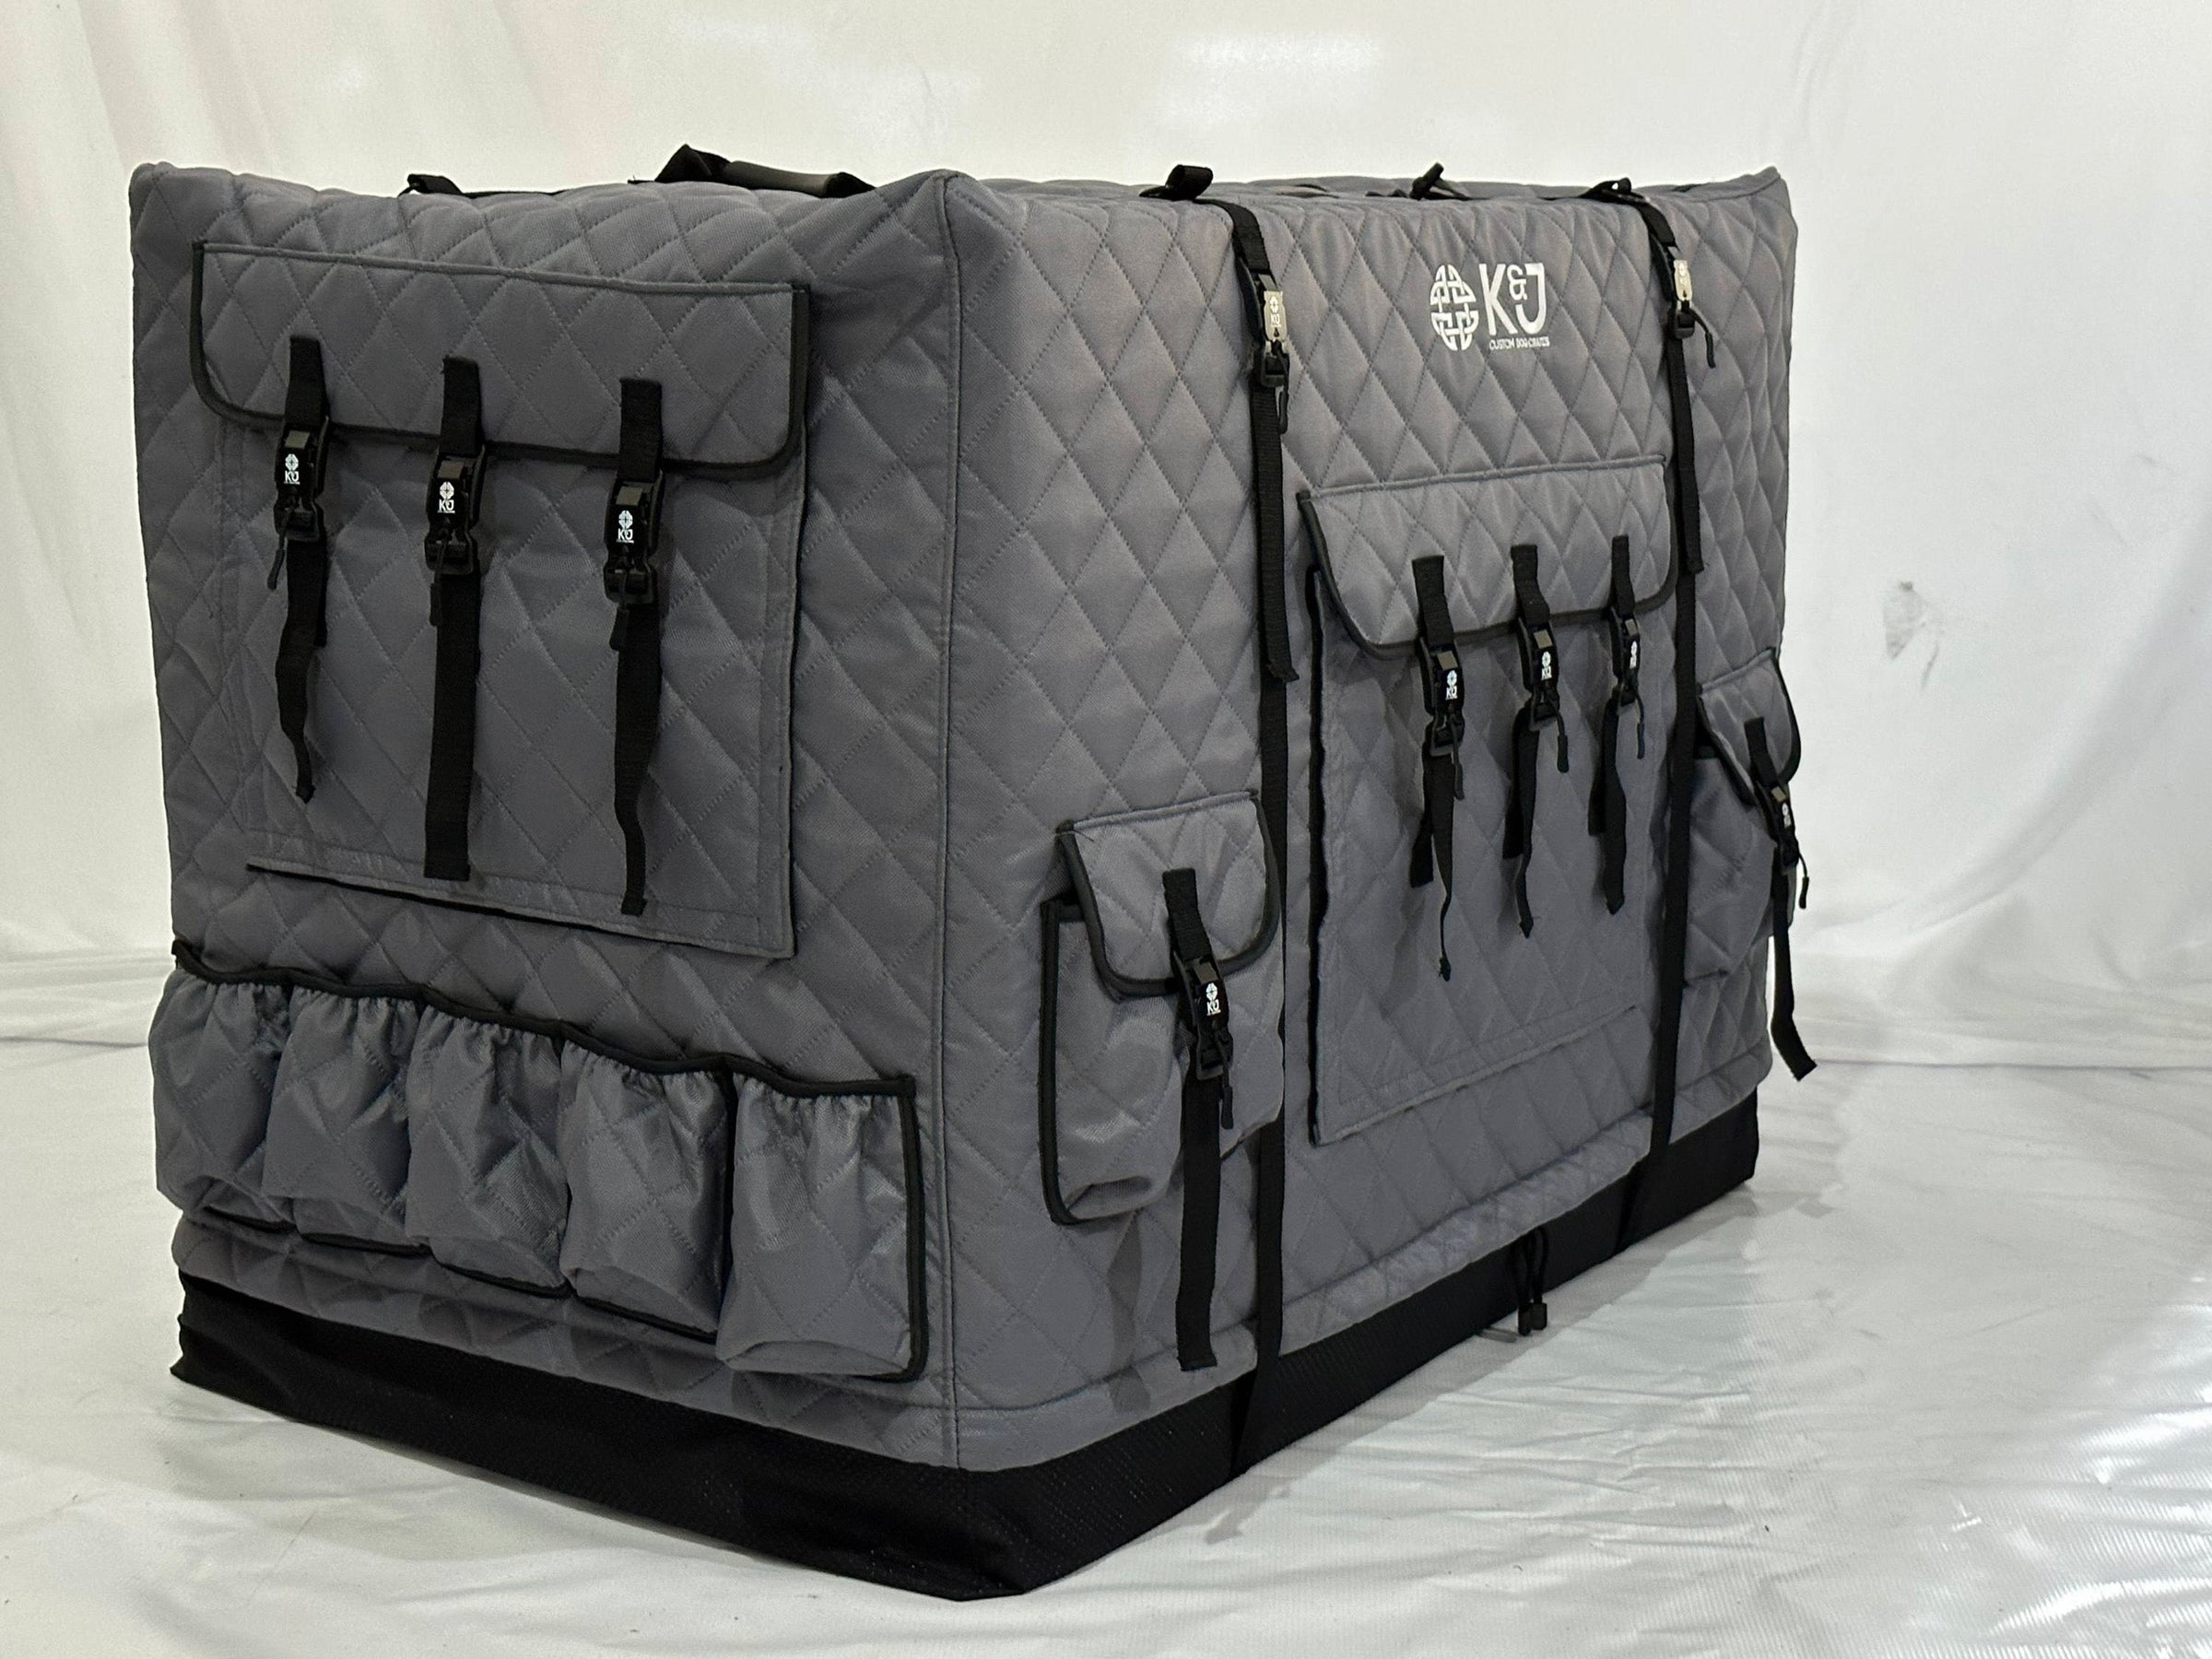  A grey insulated crate dog cover with storage pockets